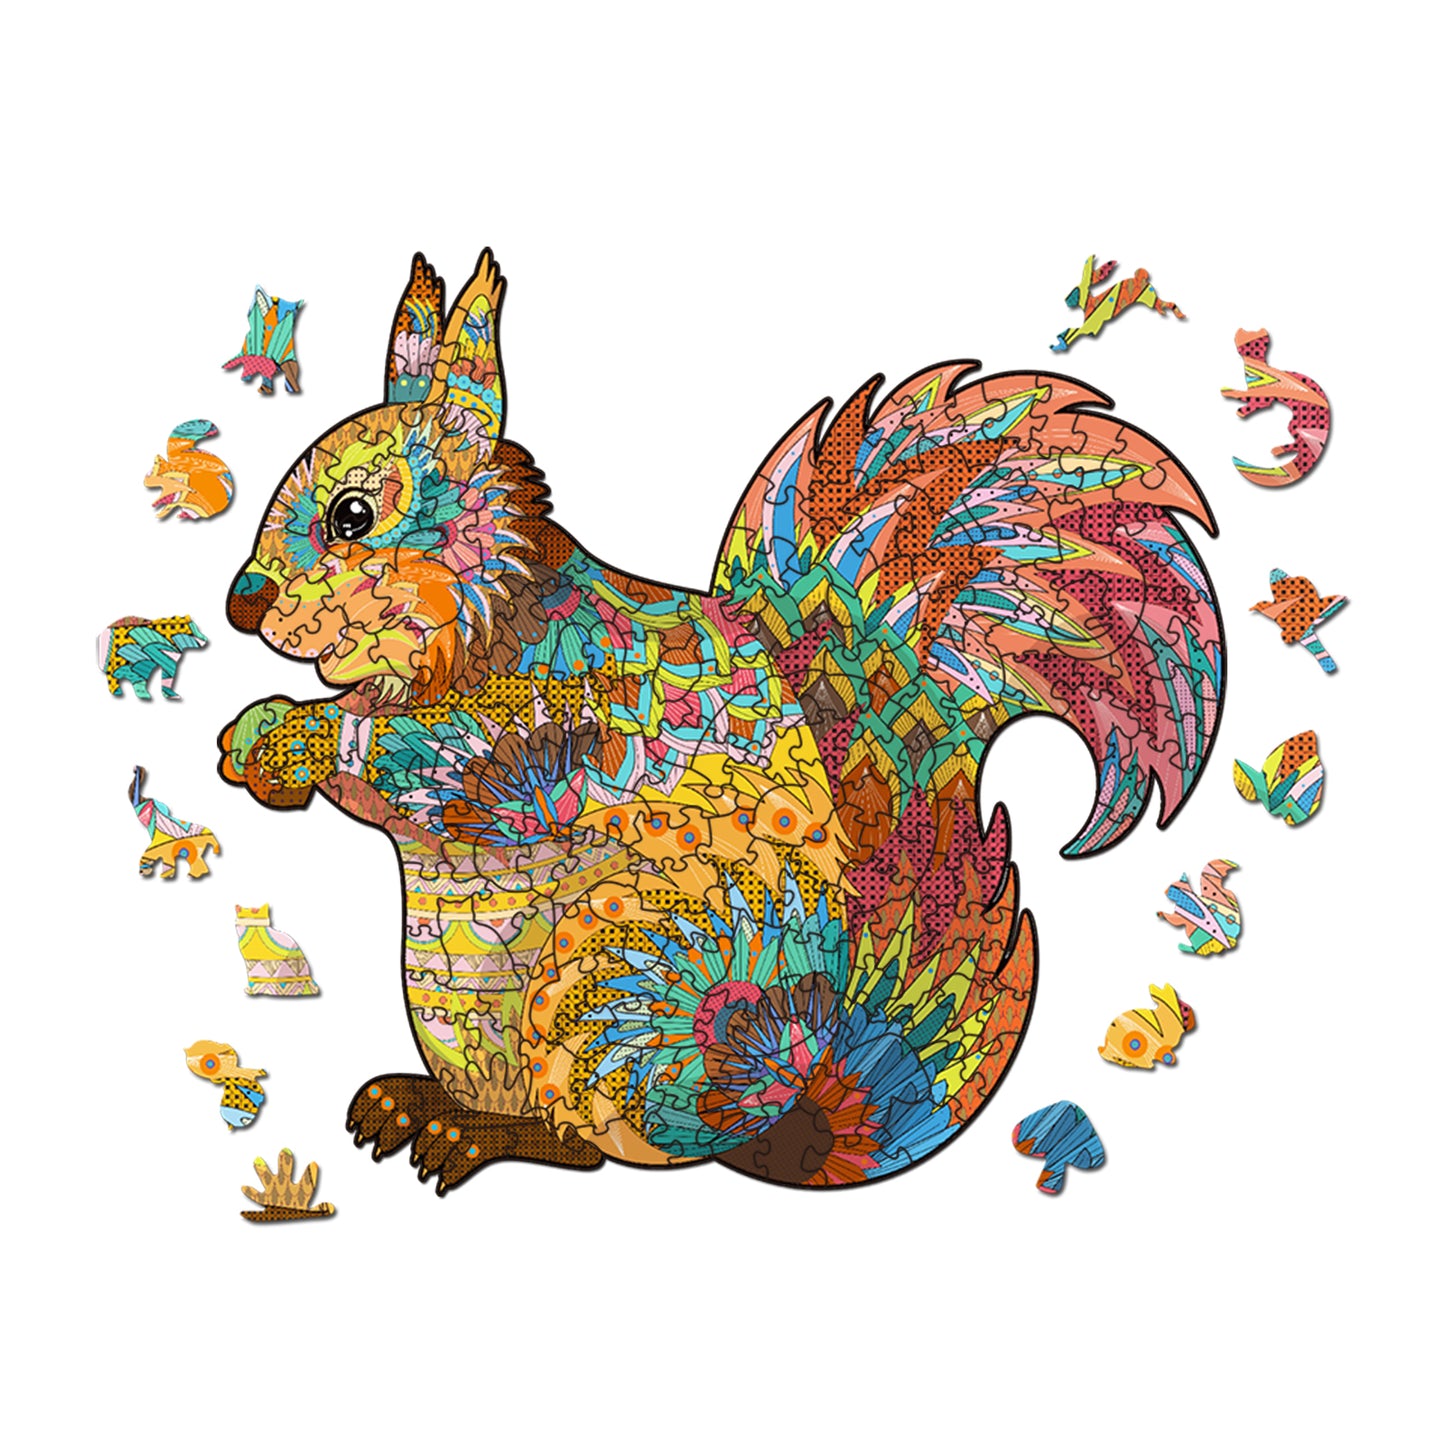 Colorful Squirrel Shaped Unique Animal Wooden Jigsaw Puzzles Toy Artwork